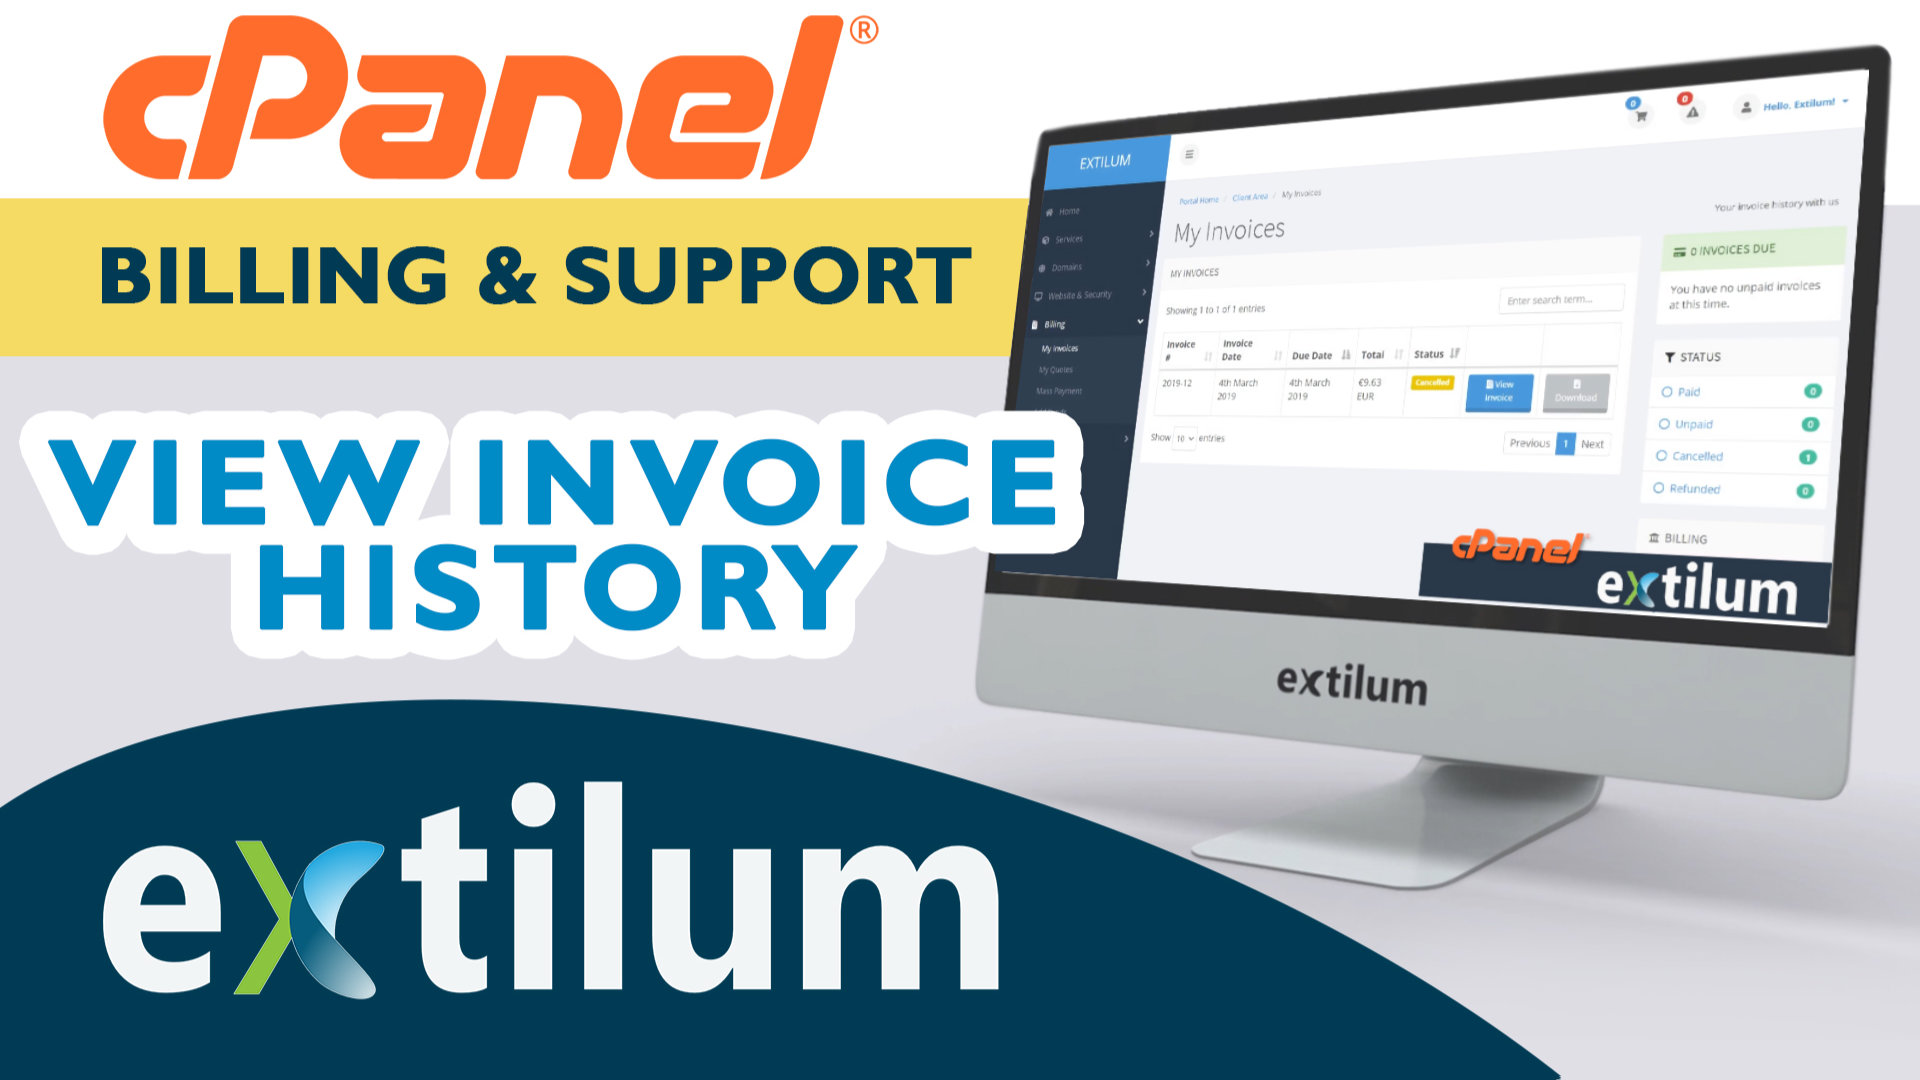 Extilum cpanel - Billing and support - ivoice history